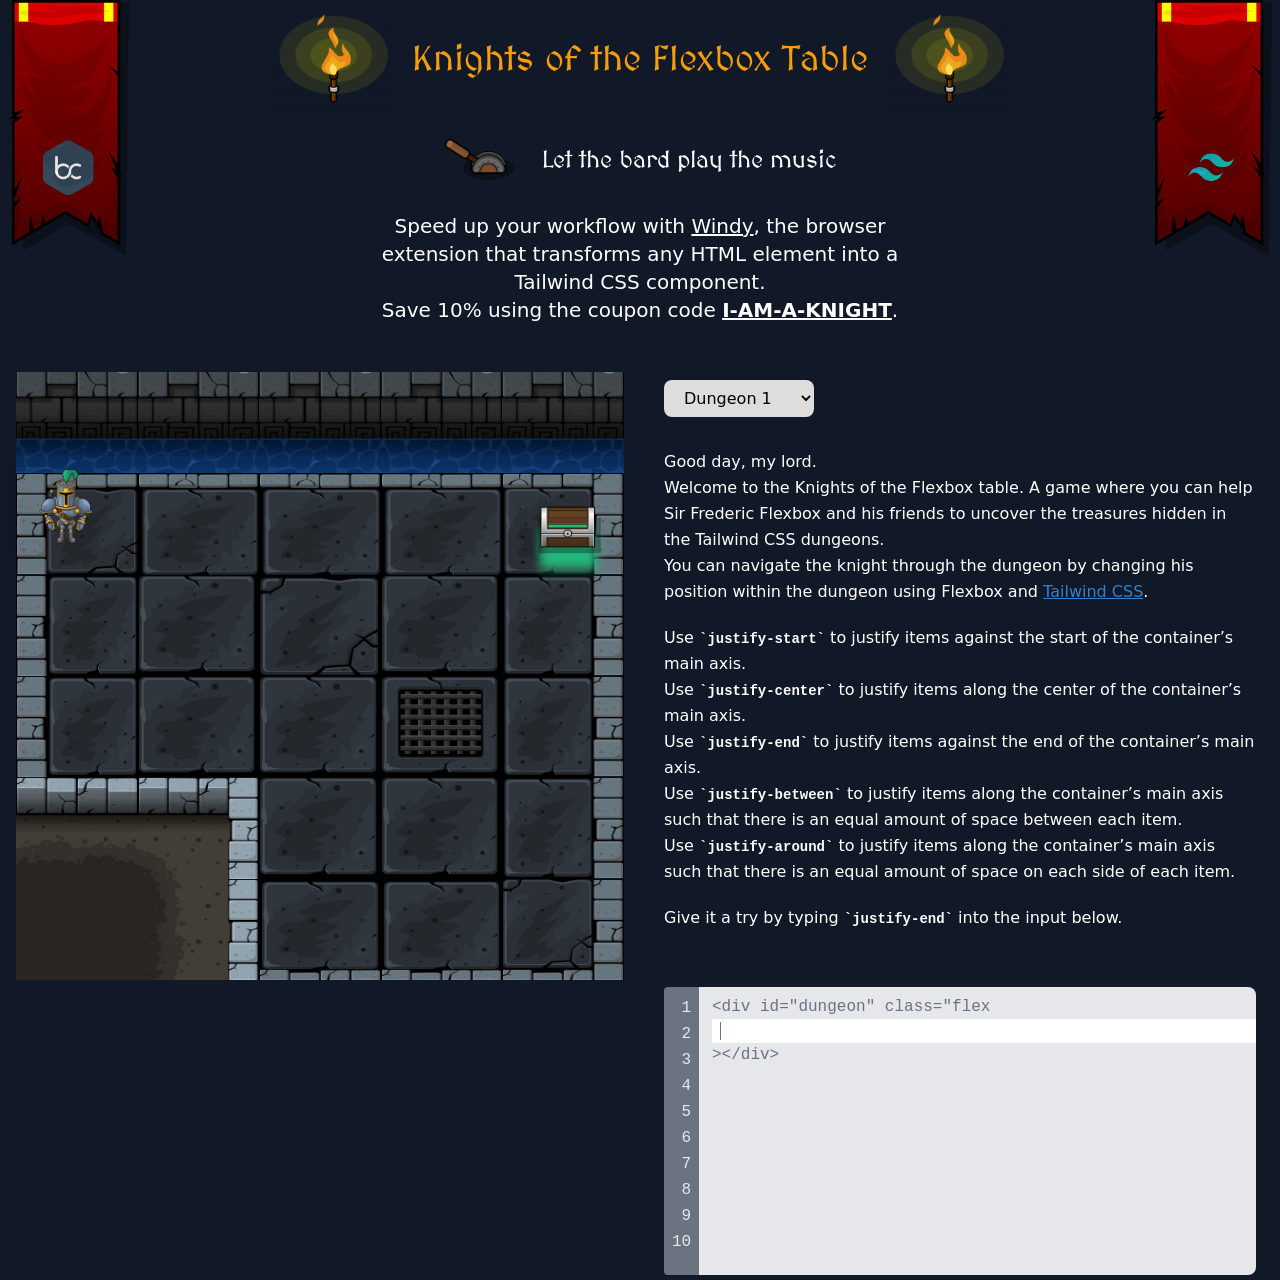 Screenshot of Knights of the Flexbox Table website